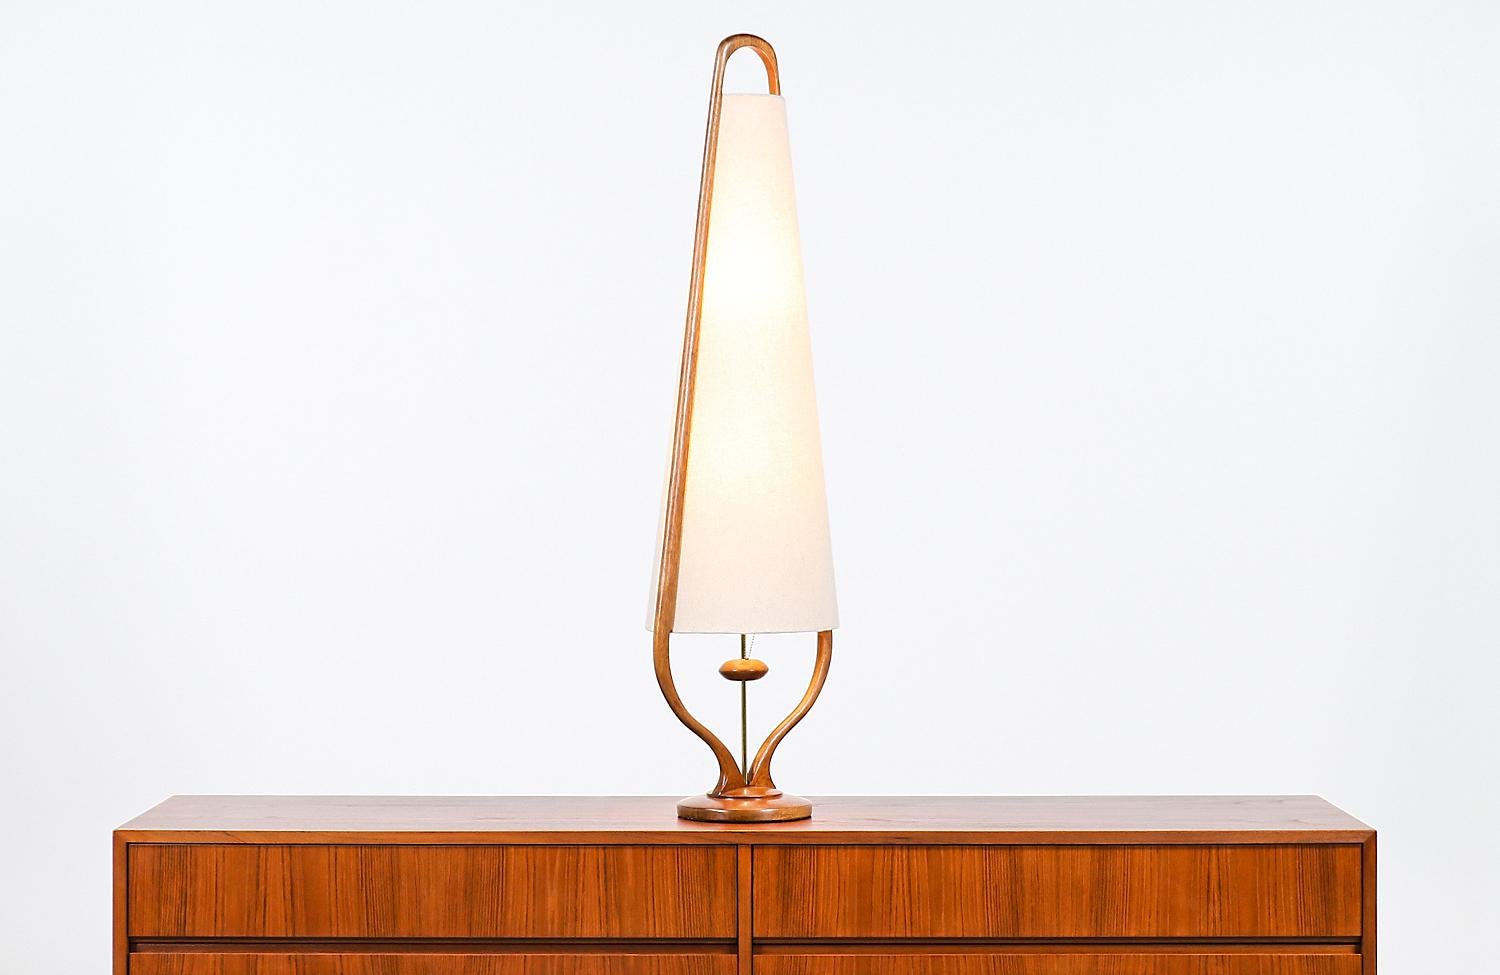 American Mid-Century Modern Sculpted Walnut Arc and Brass Table Lamp by Modeline